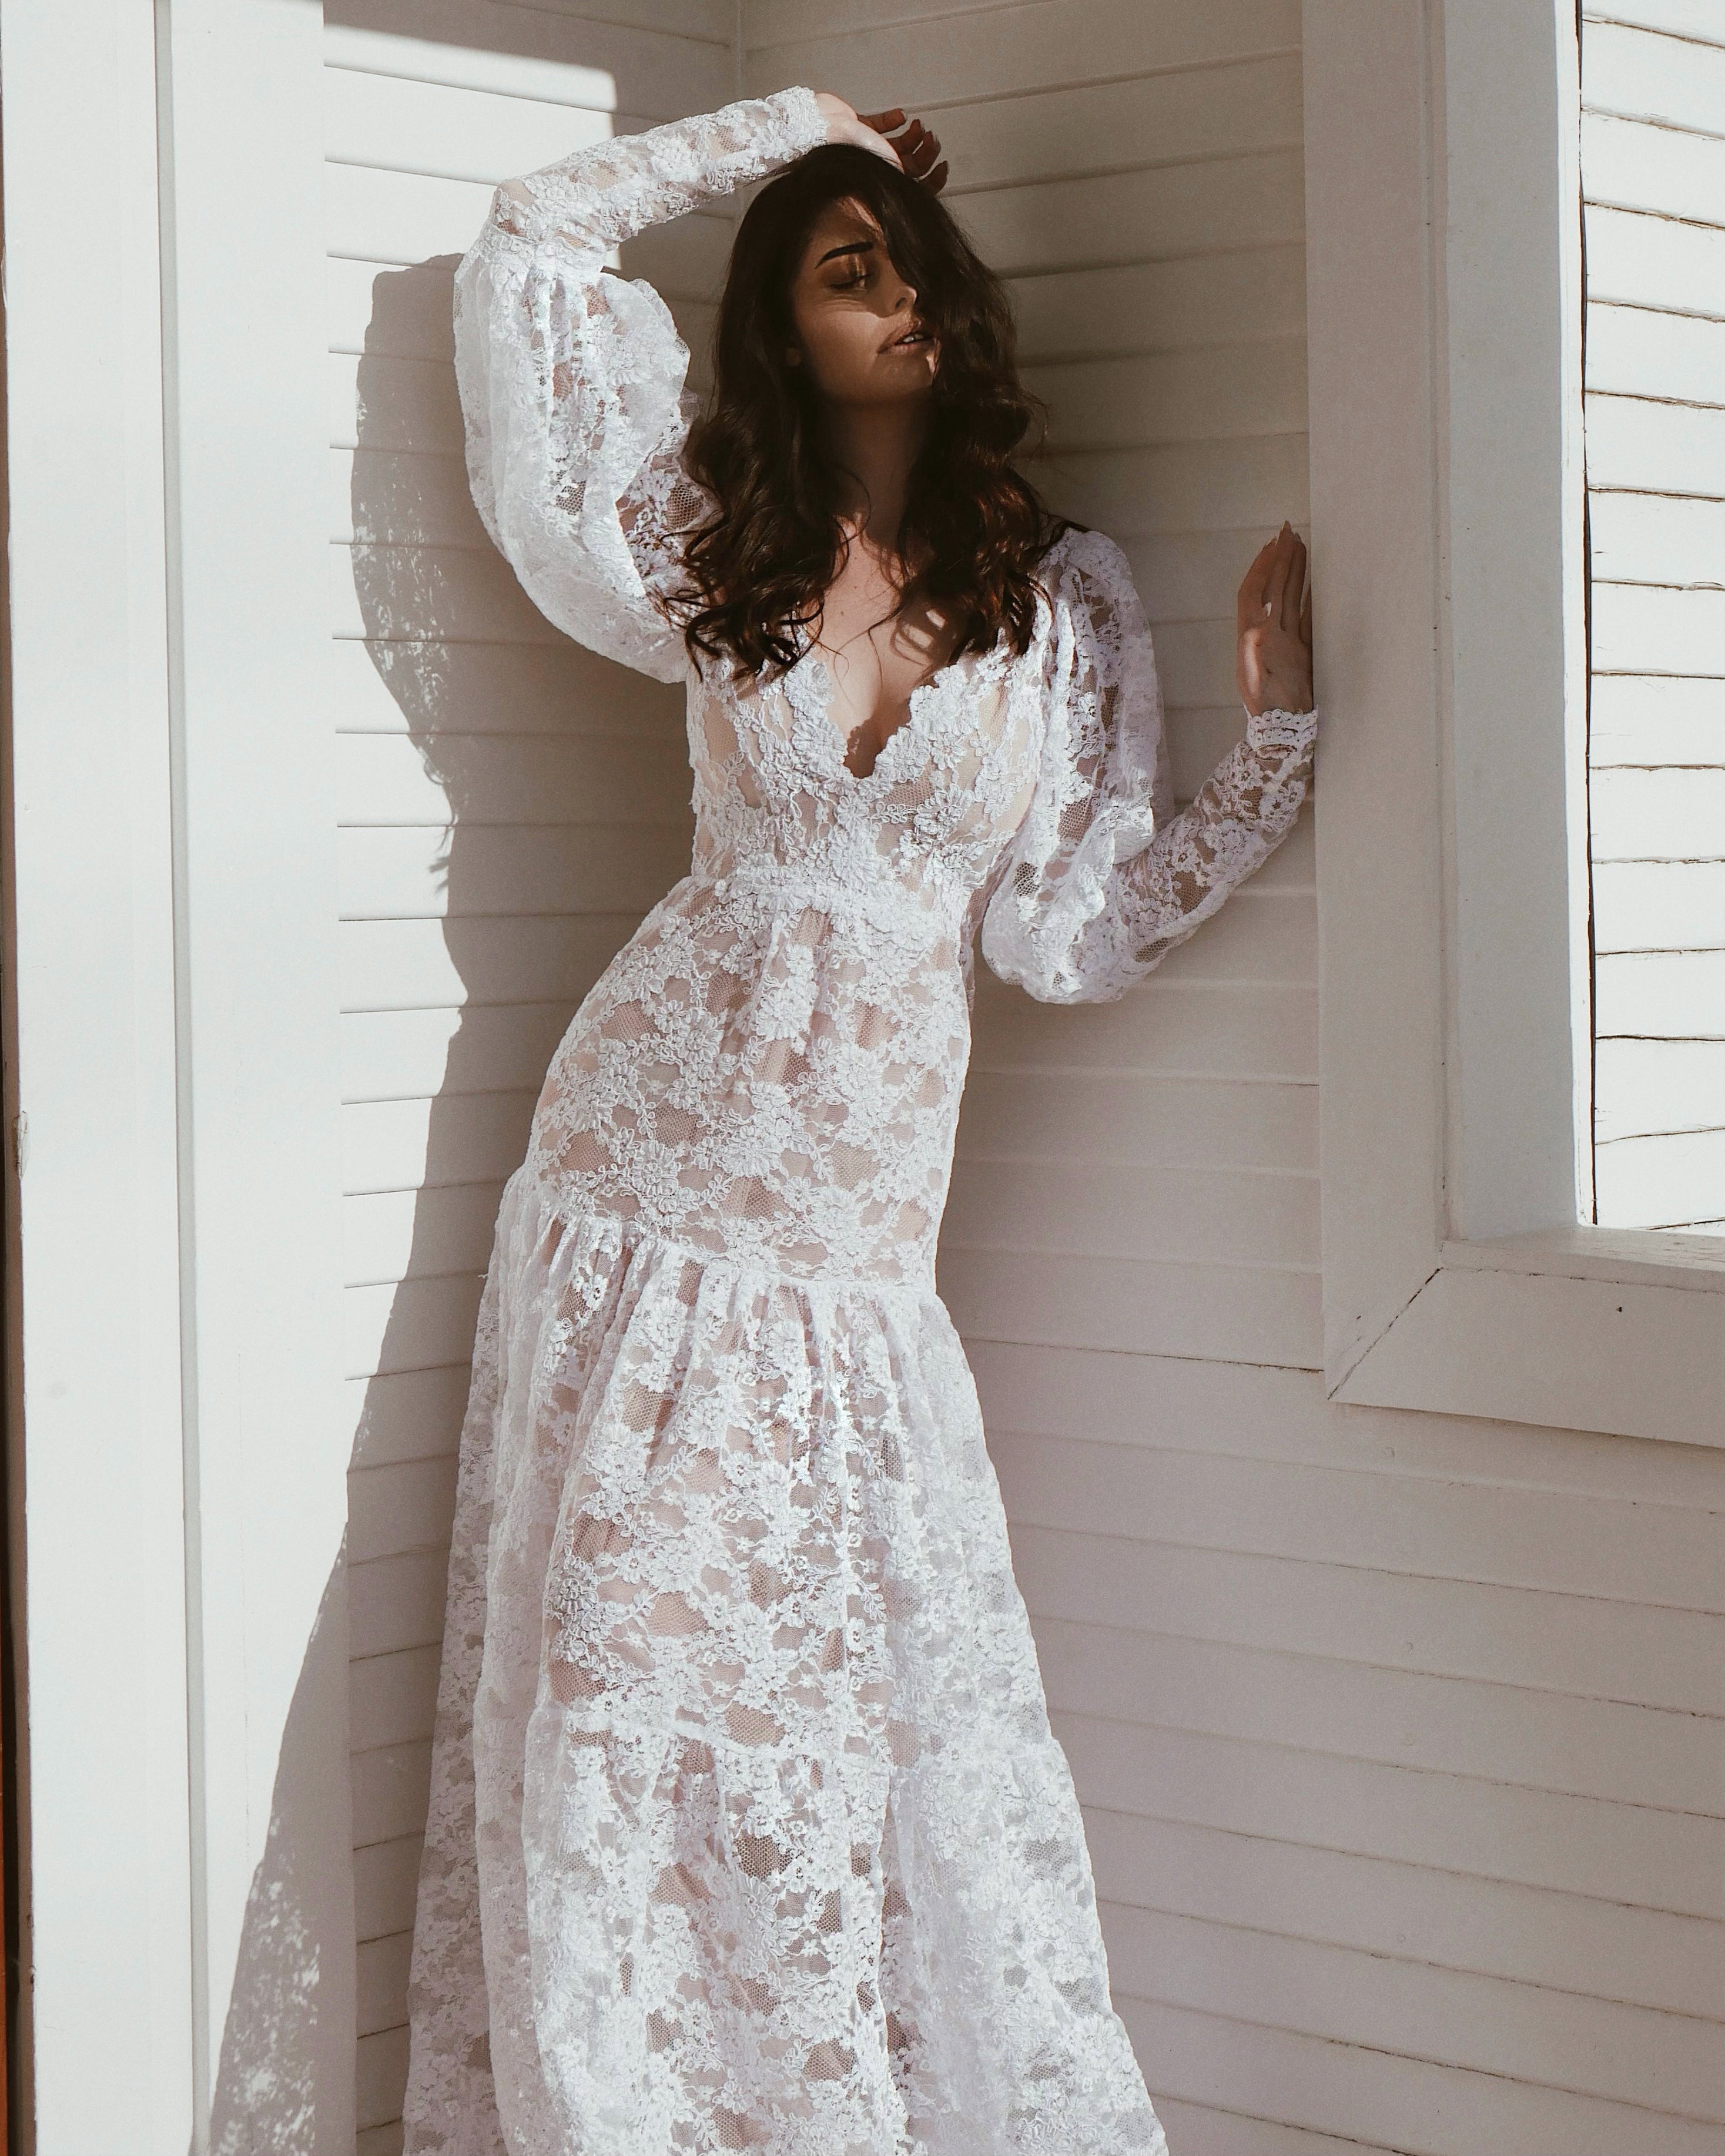 A model poses in gigot style lace sleeves for a bridal fashion editorial, front.